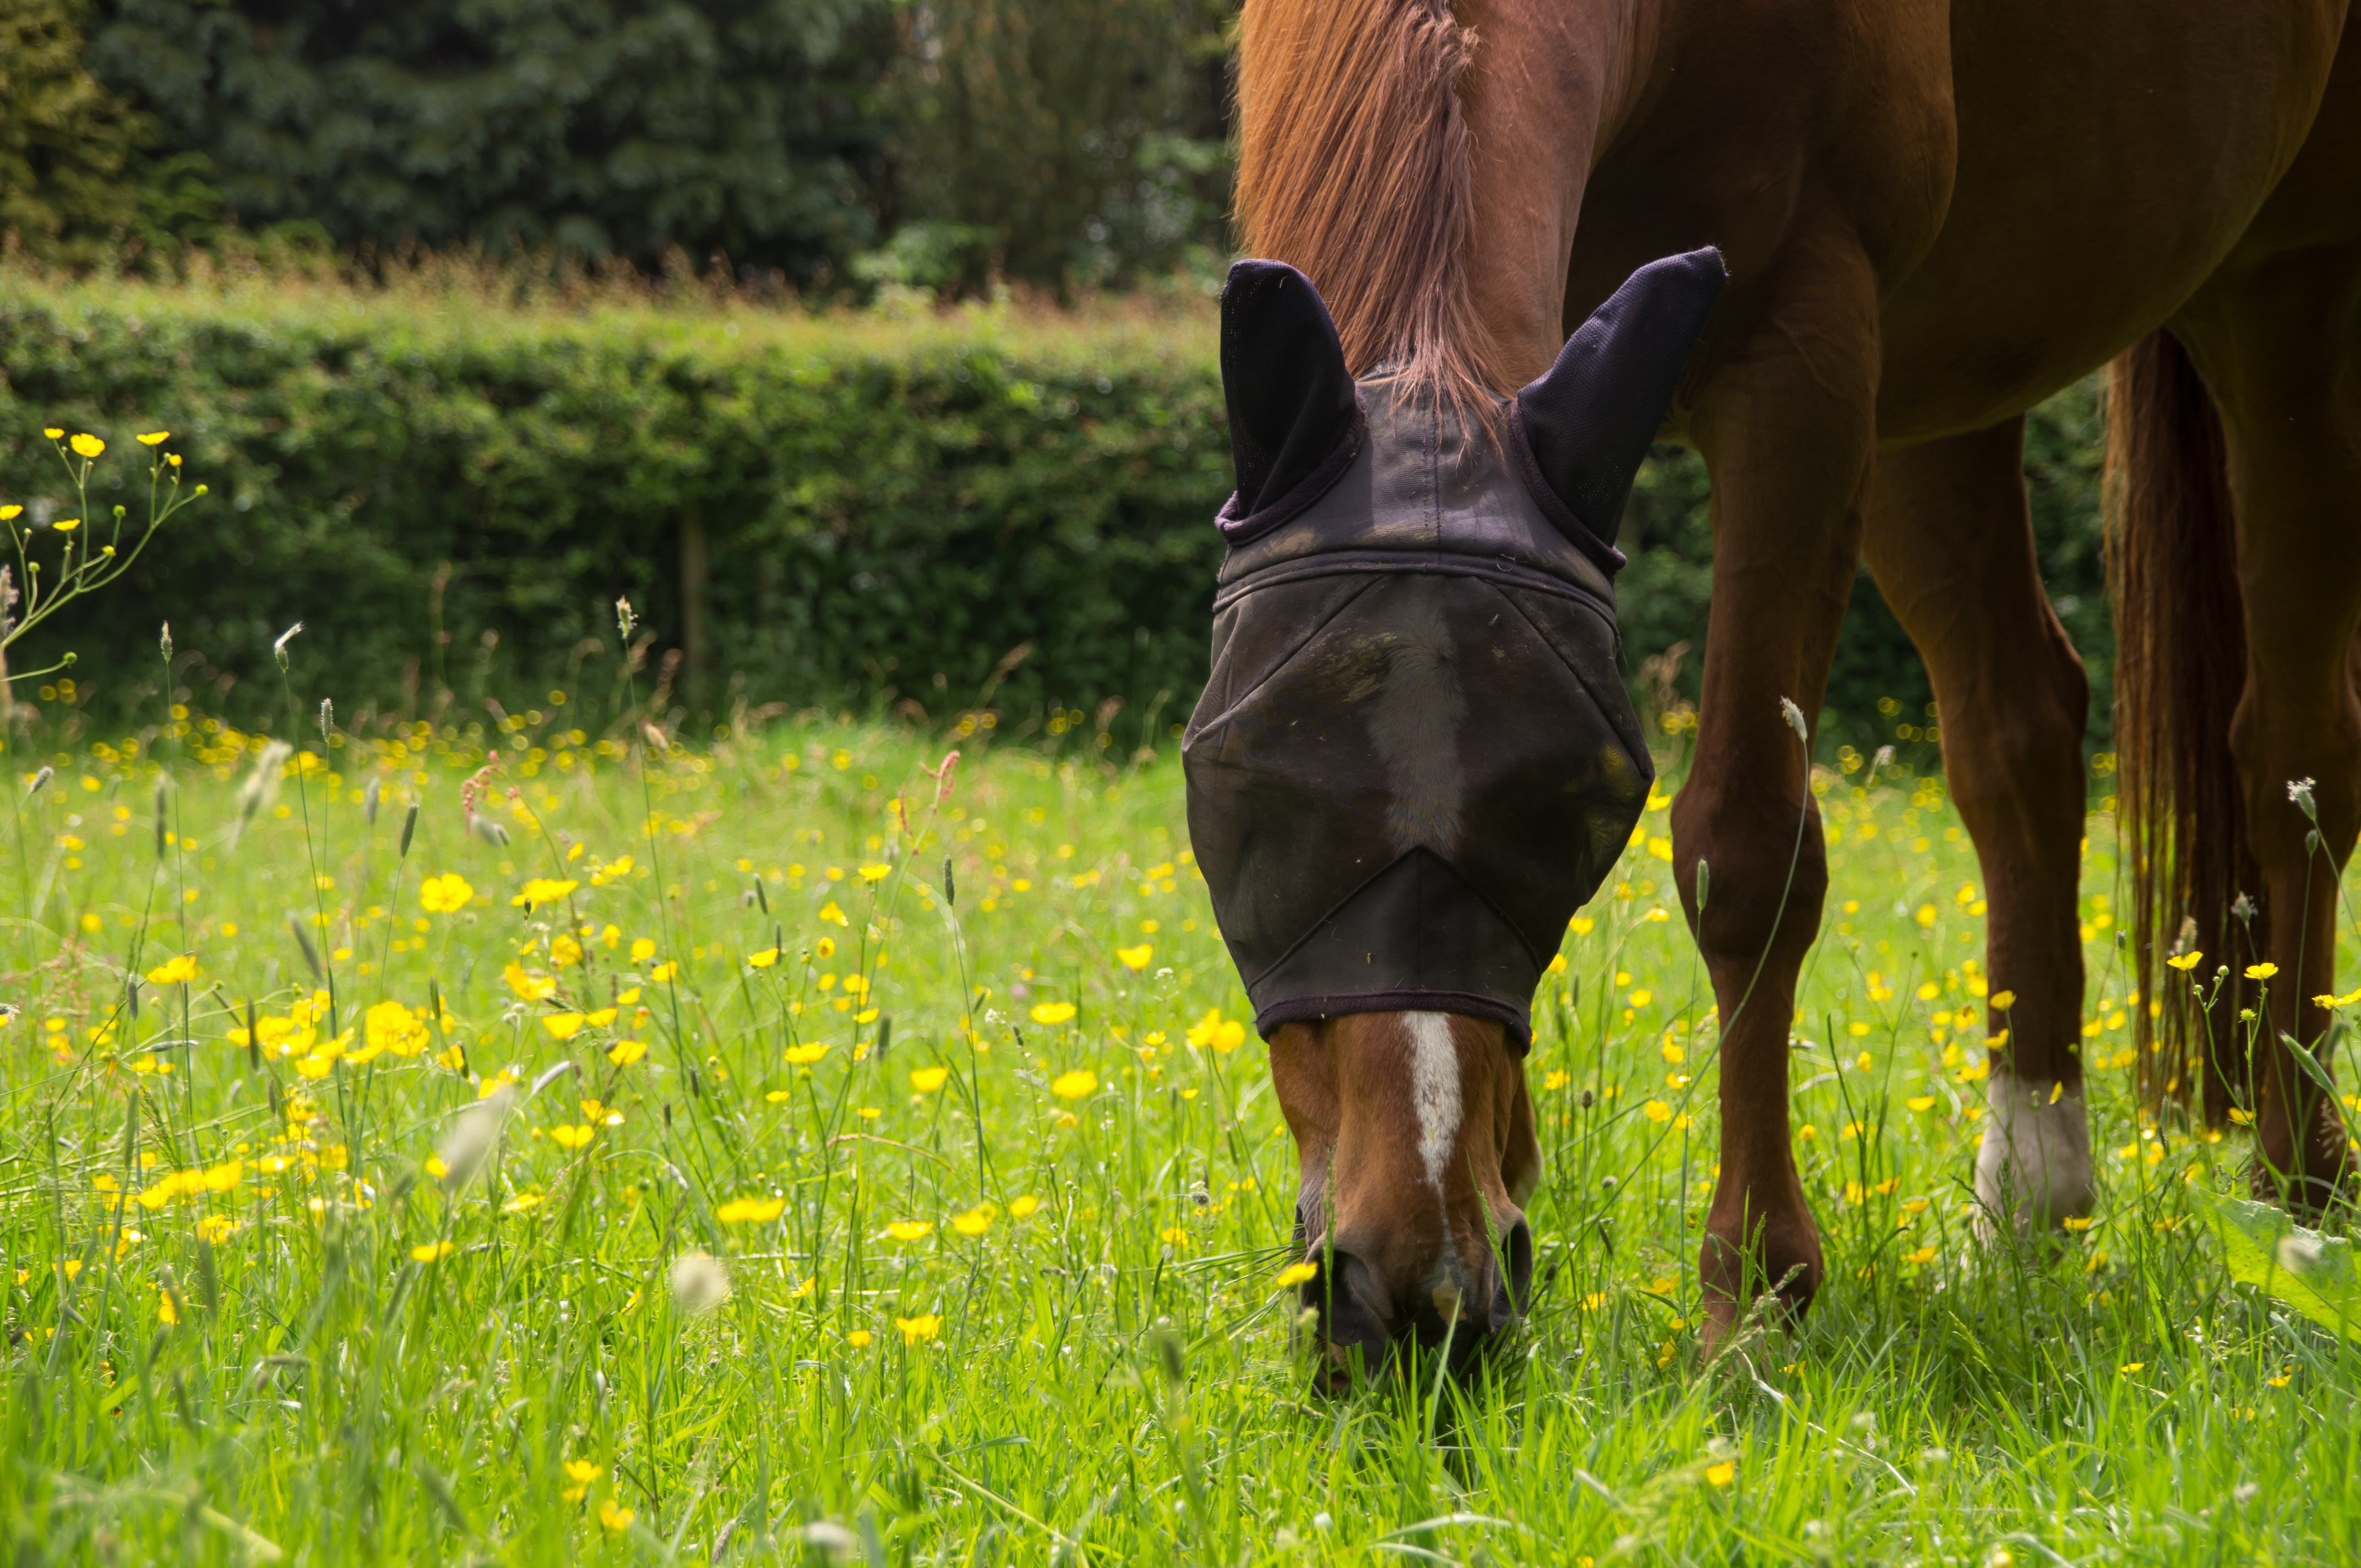 A horse grazing in a field with dandelions wearing a flymask